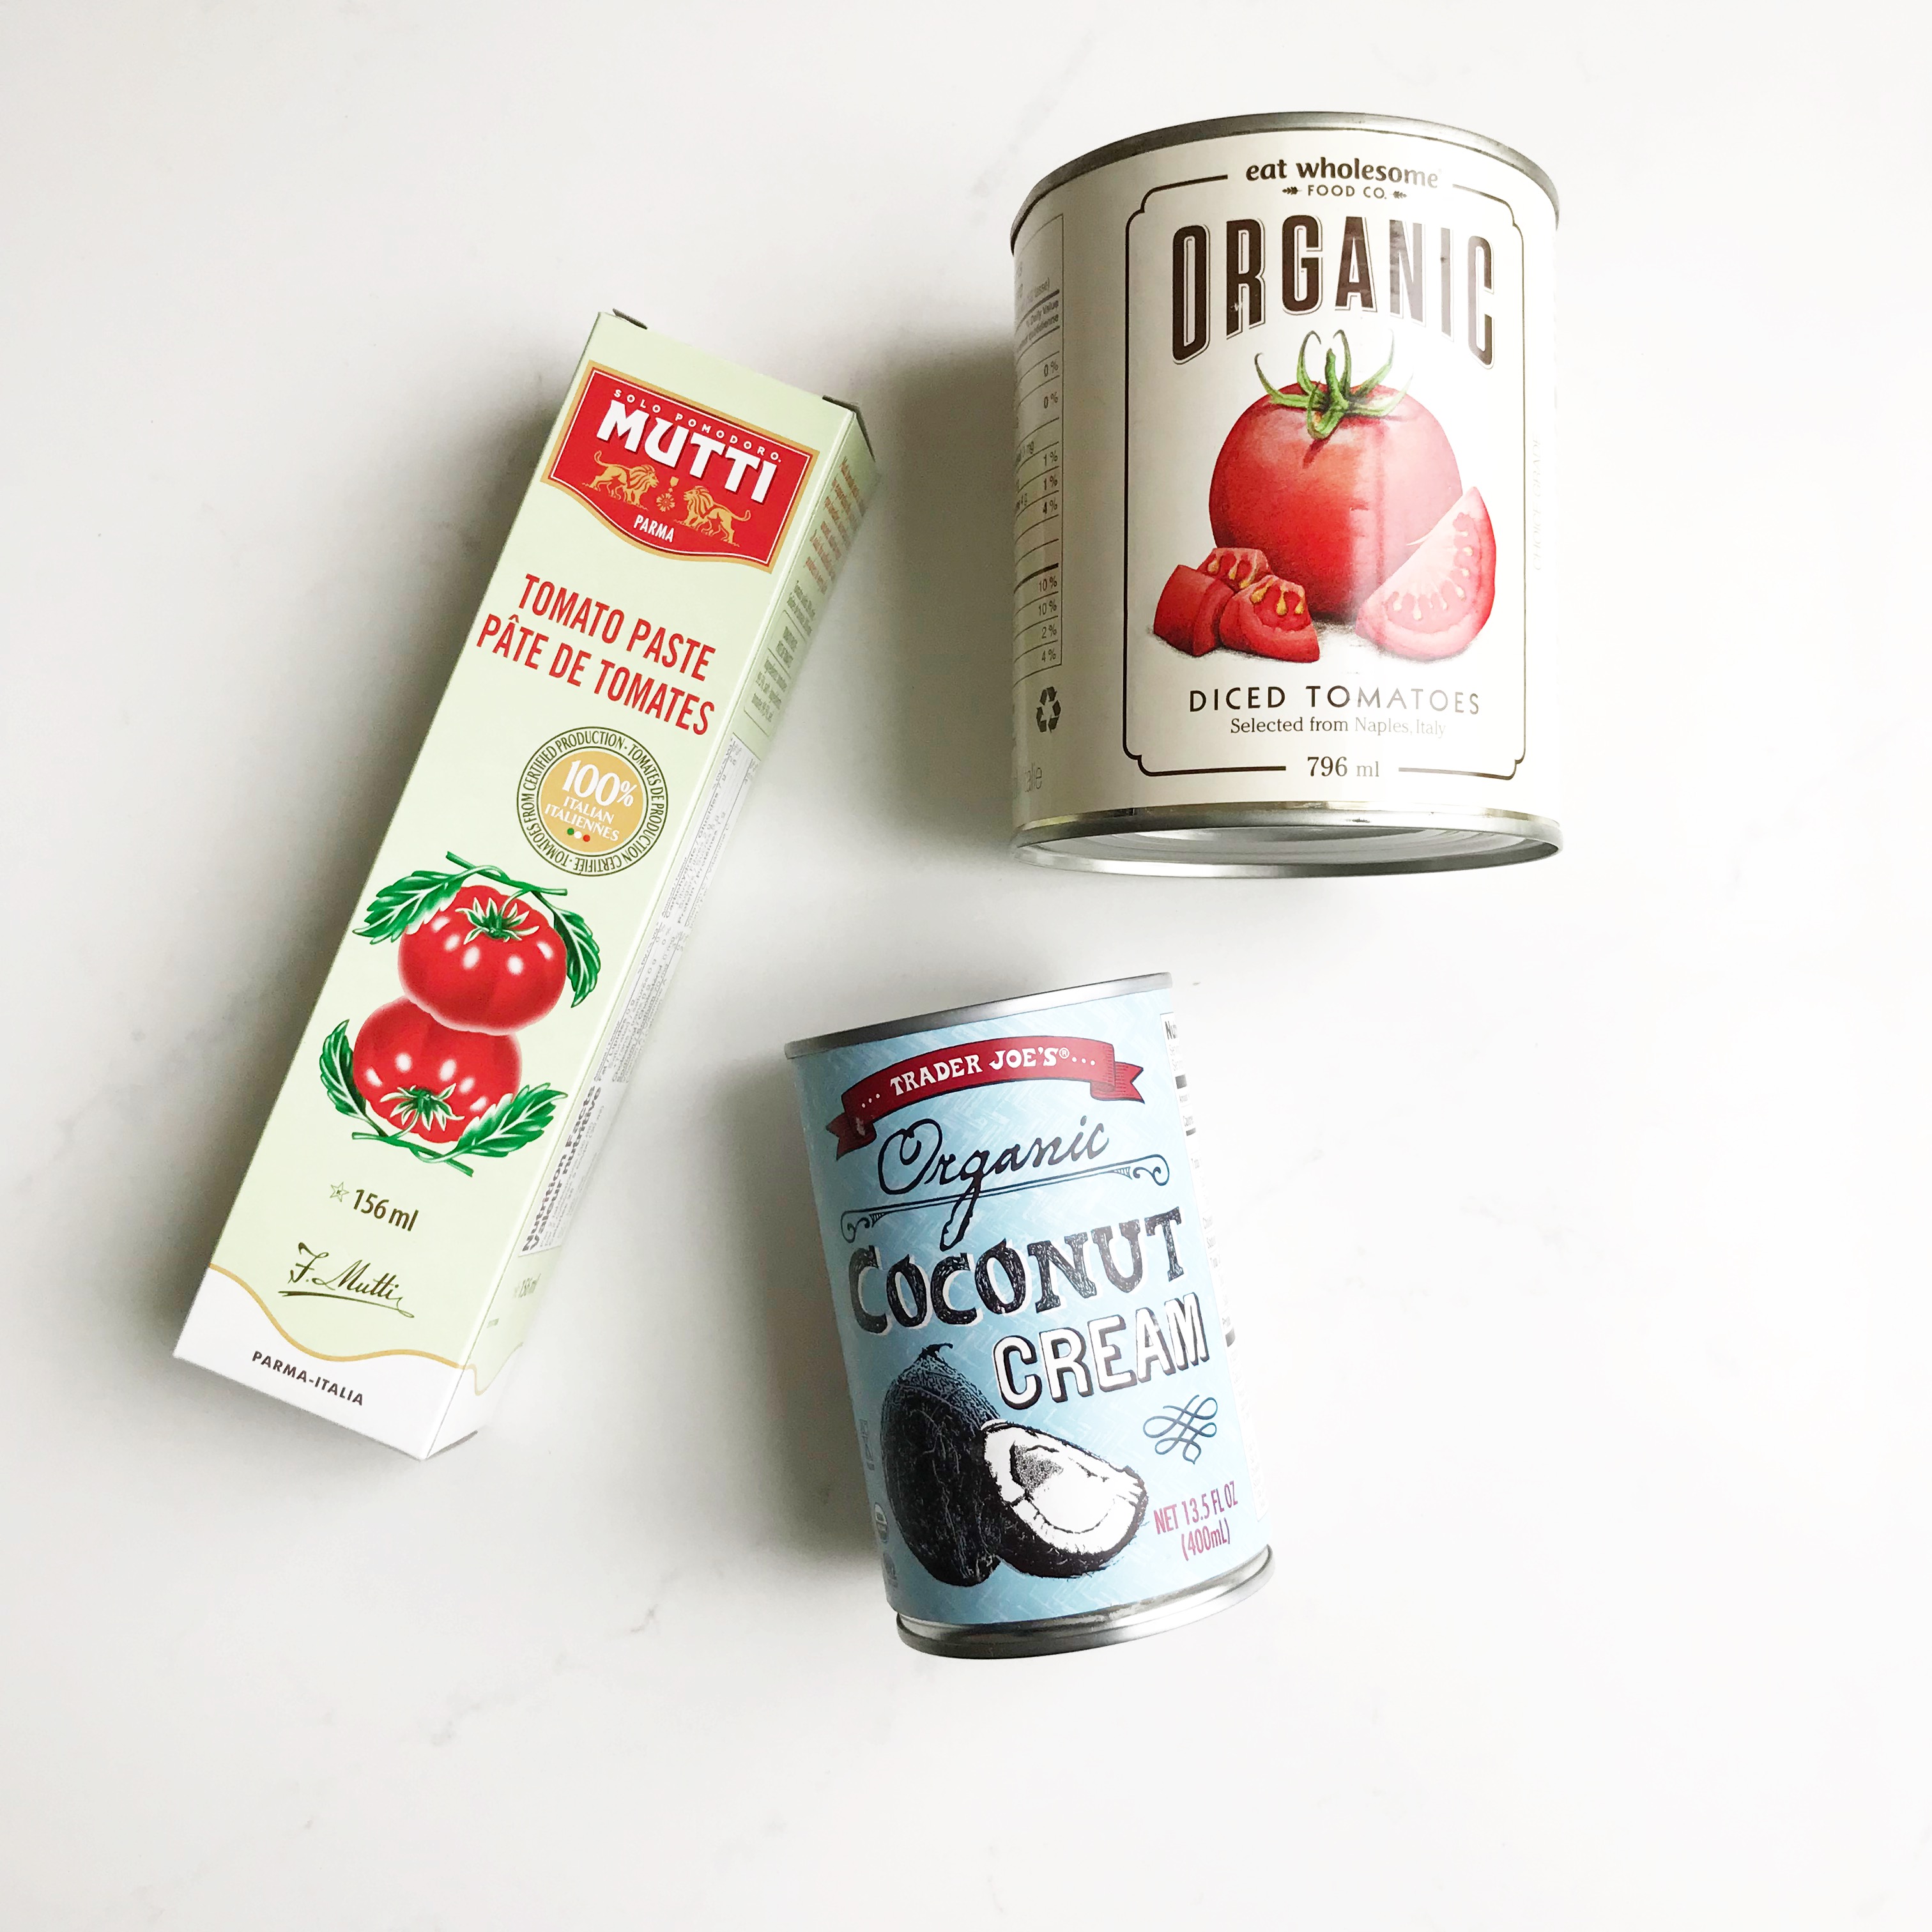 coconut cream, organic diced tomatoes and tomato paste: some of my must have condiments!